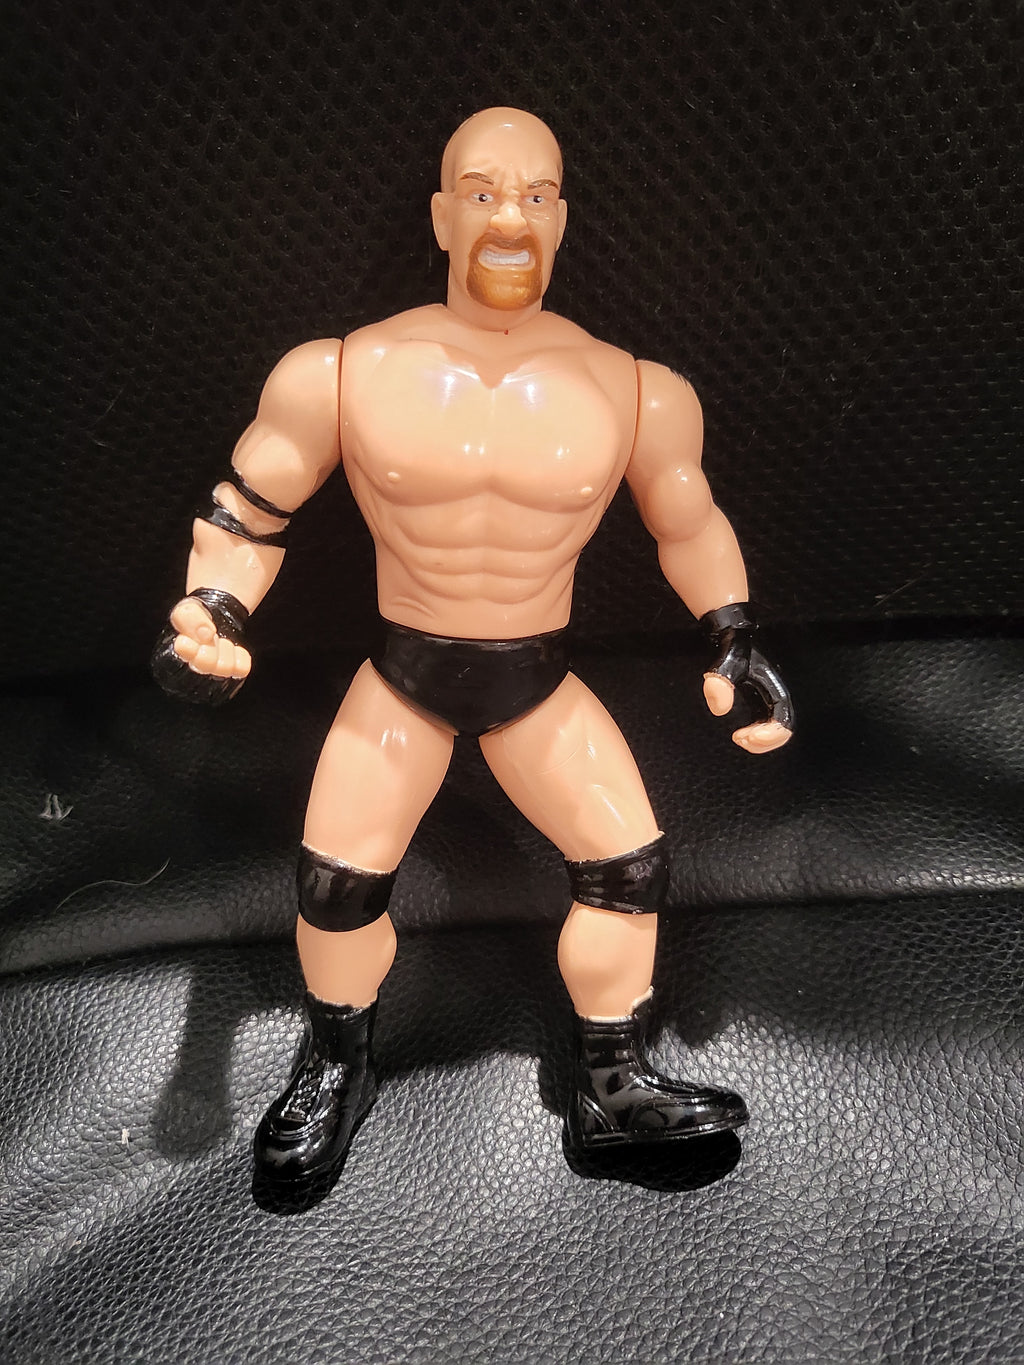 1998 OSFT WCW 6" Bill Goldberg Wrestling Figure EXCELLENT Condition